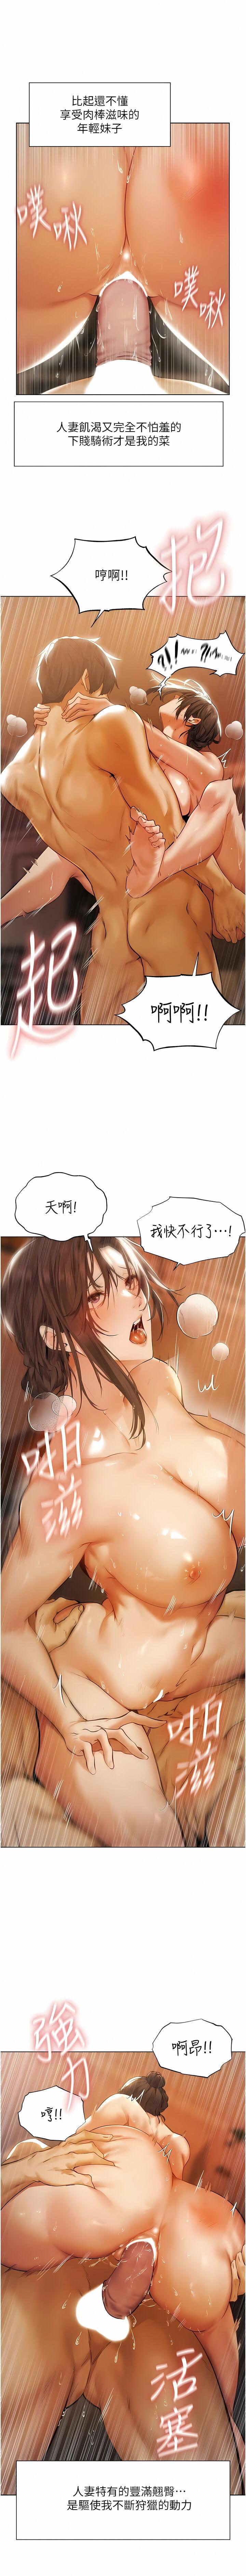 Peeing Milf Hunting in Another World | 人妻猎人 | 人妻獵人 Fetiche - Page 7